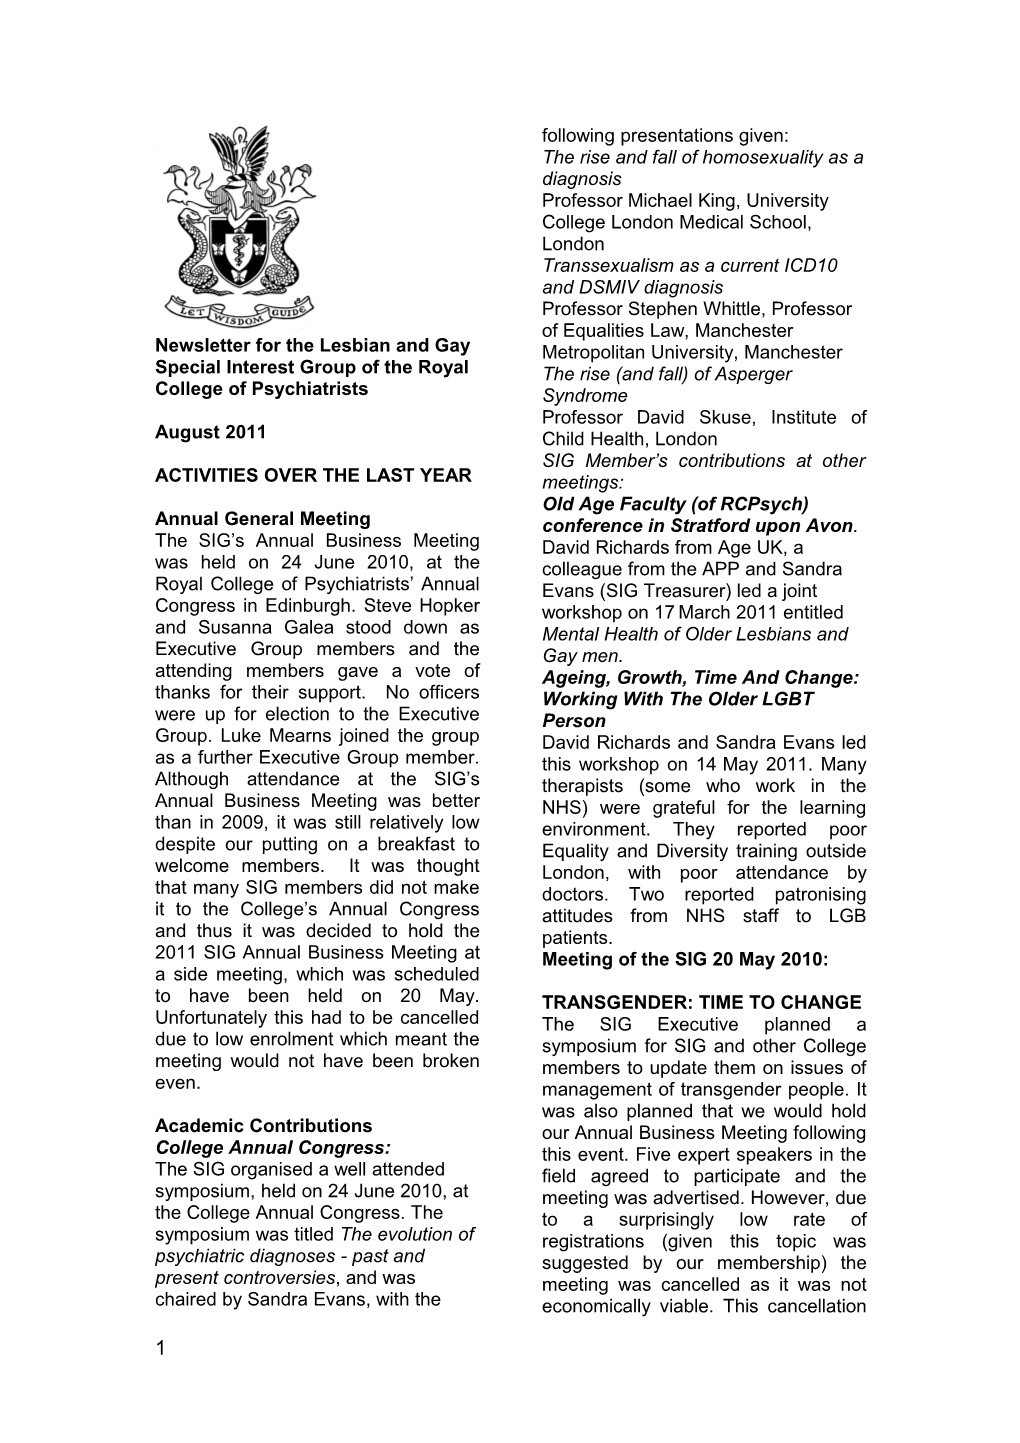 Newsletter for the Lesbian and Gay Special Interest Group of the Royal College of Psychiatrists